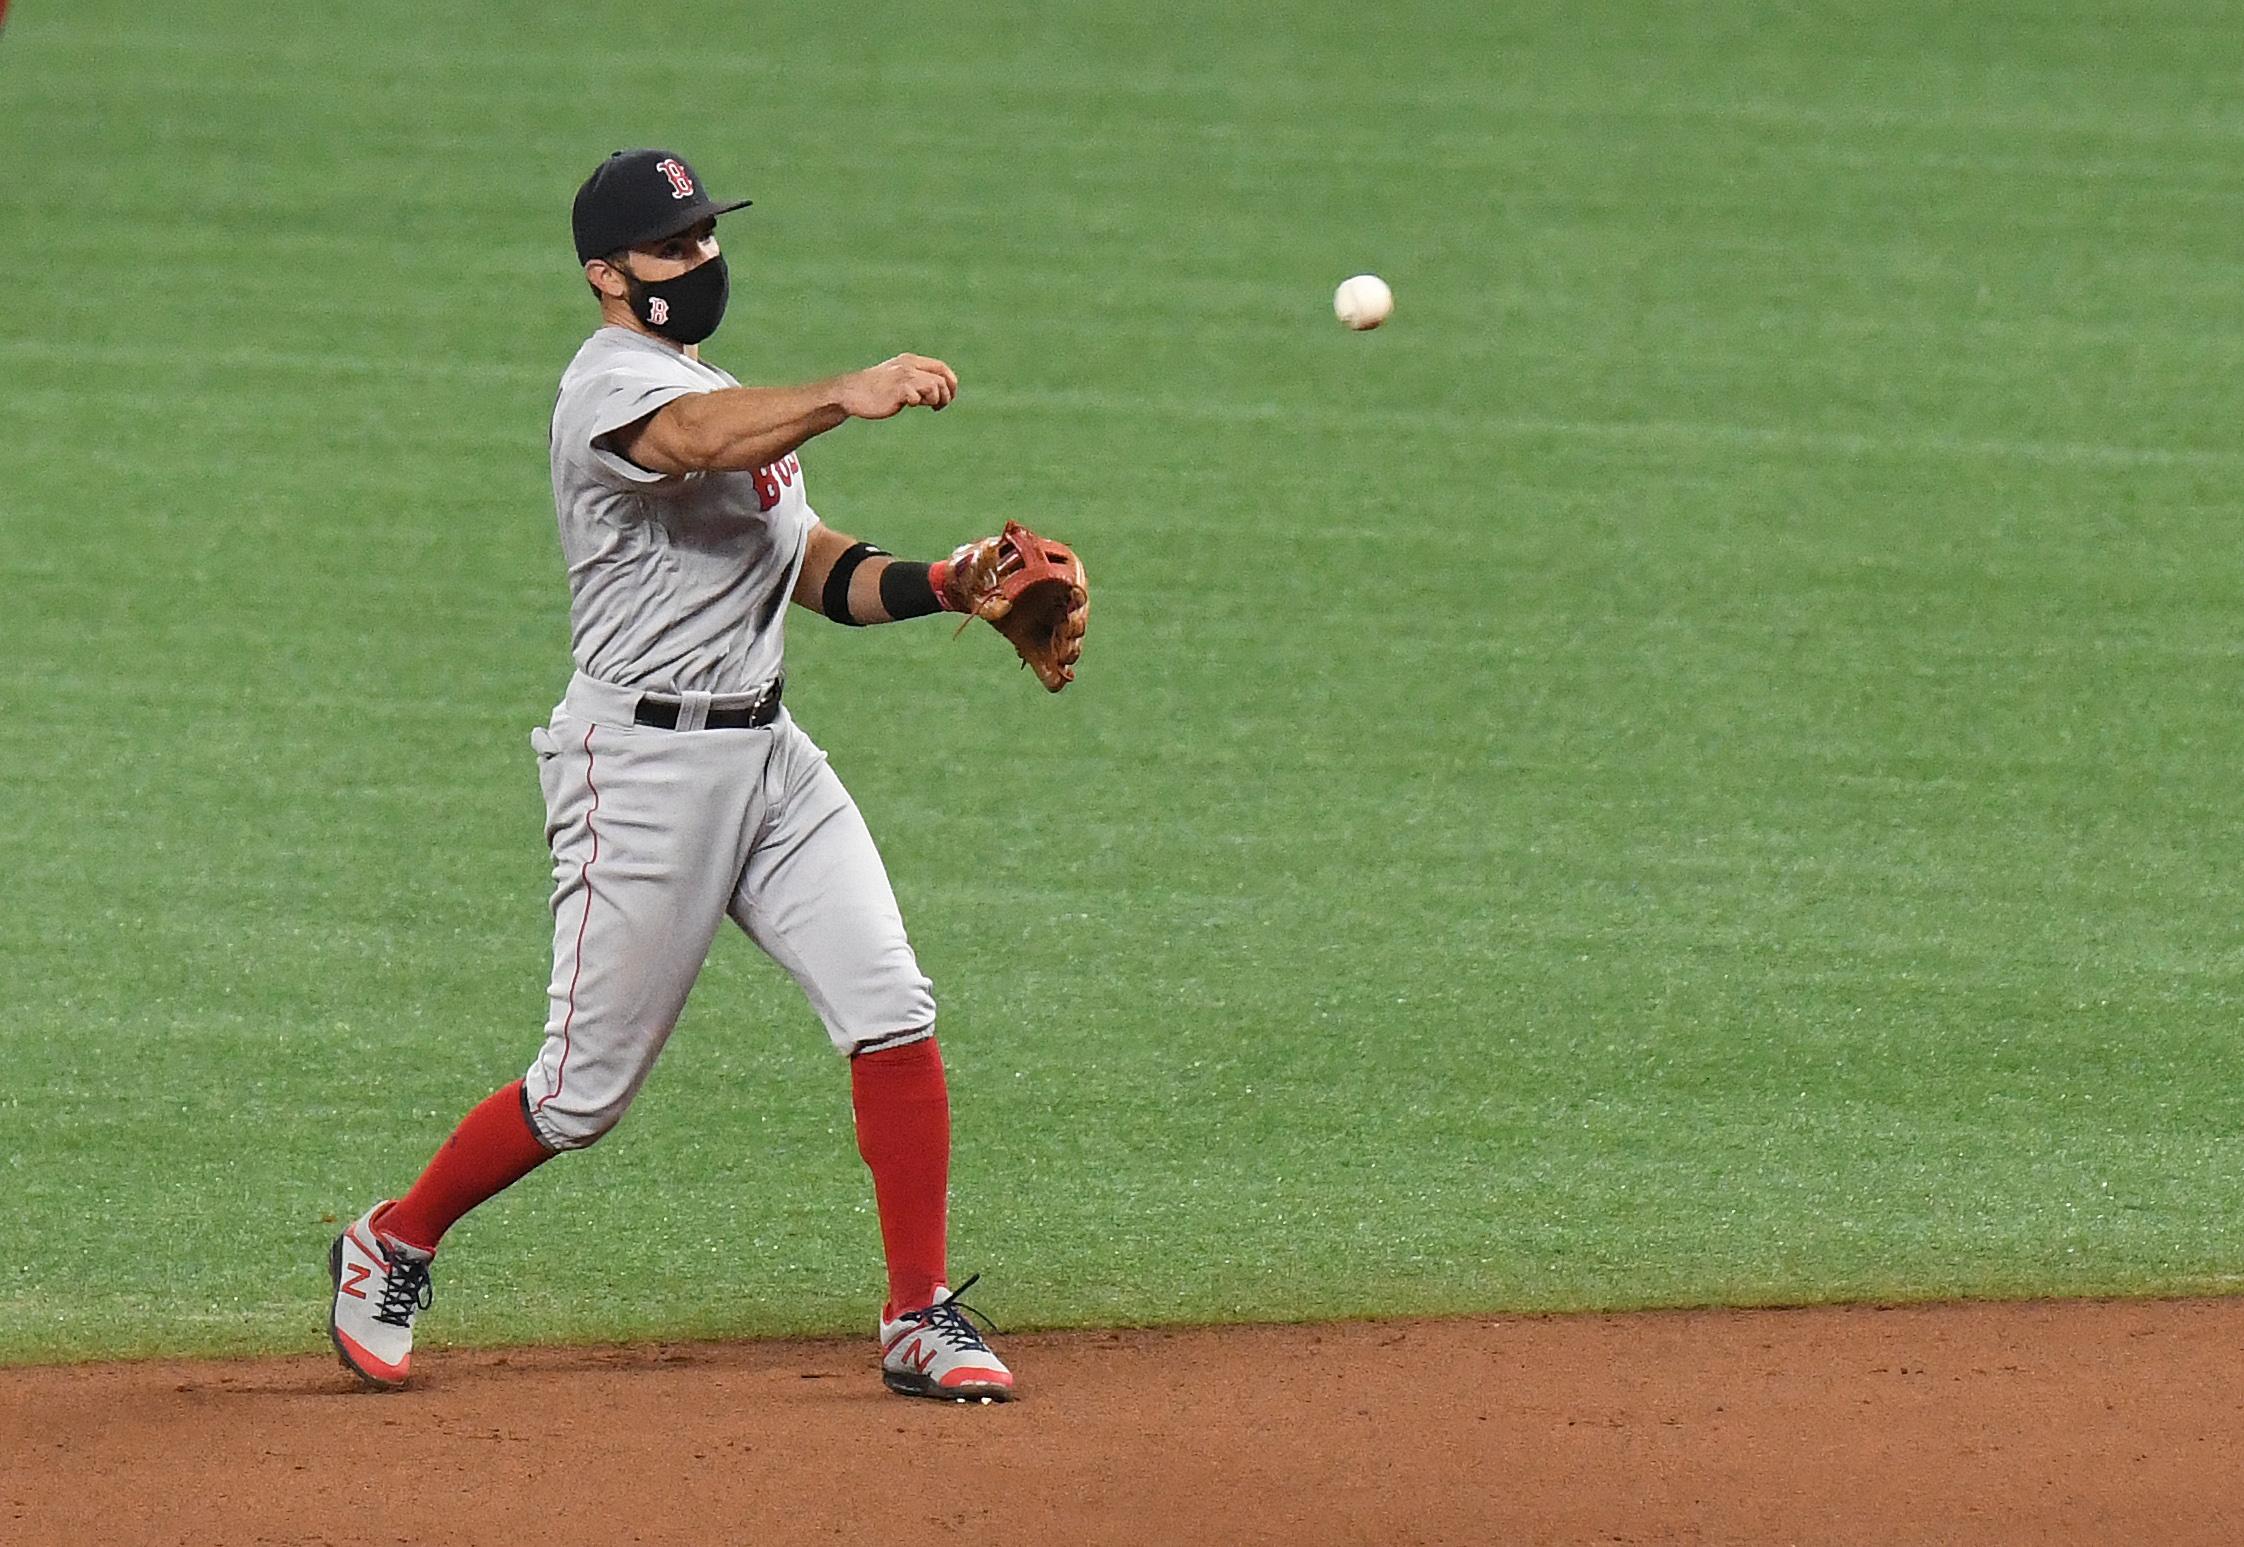 Boston Red Sox outfielder Jose Peraza (3) throws to first base in the eighth inning against the Tampa Bay Rays at Tropicana Field. / Jonathan Dyer - USA TODAY Sports